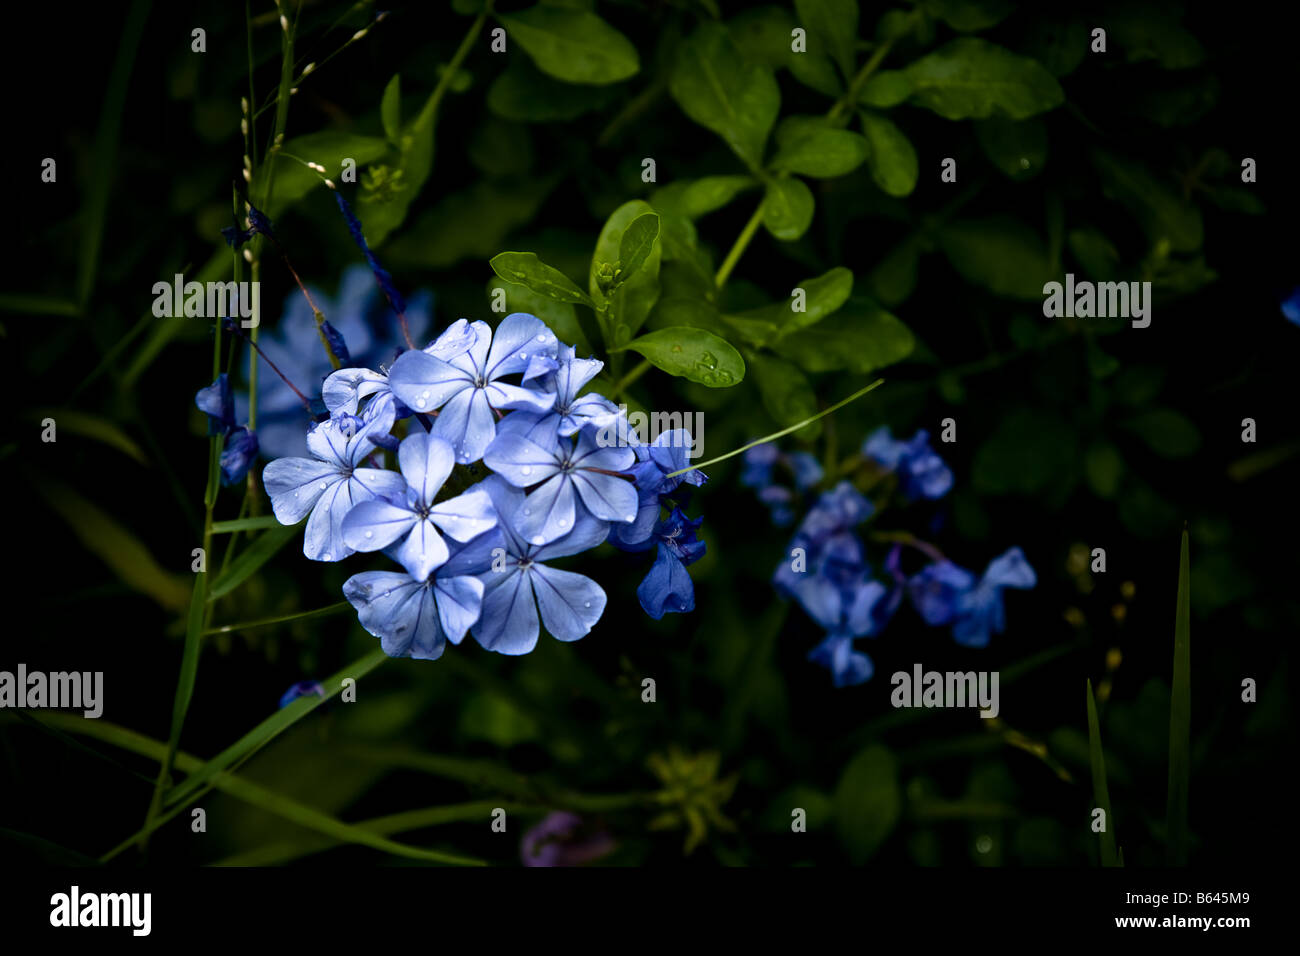 Flowers - Soft Focus - Blue Plumbago; Other Common Names: Plumbago Auriculata, Cape Plumbago, or Cape Leadwort - Vignetted Stock Photo